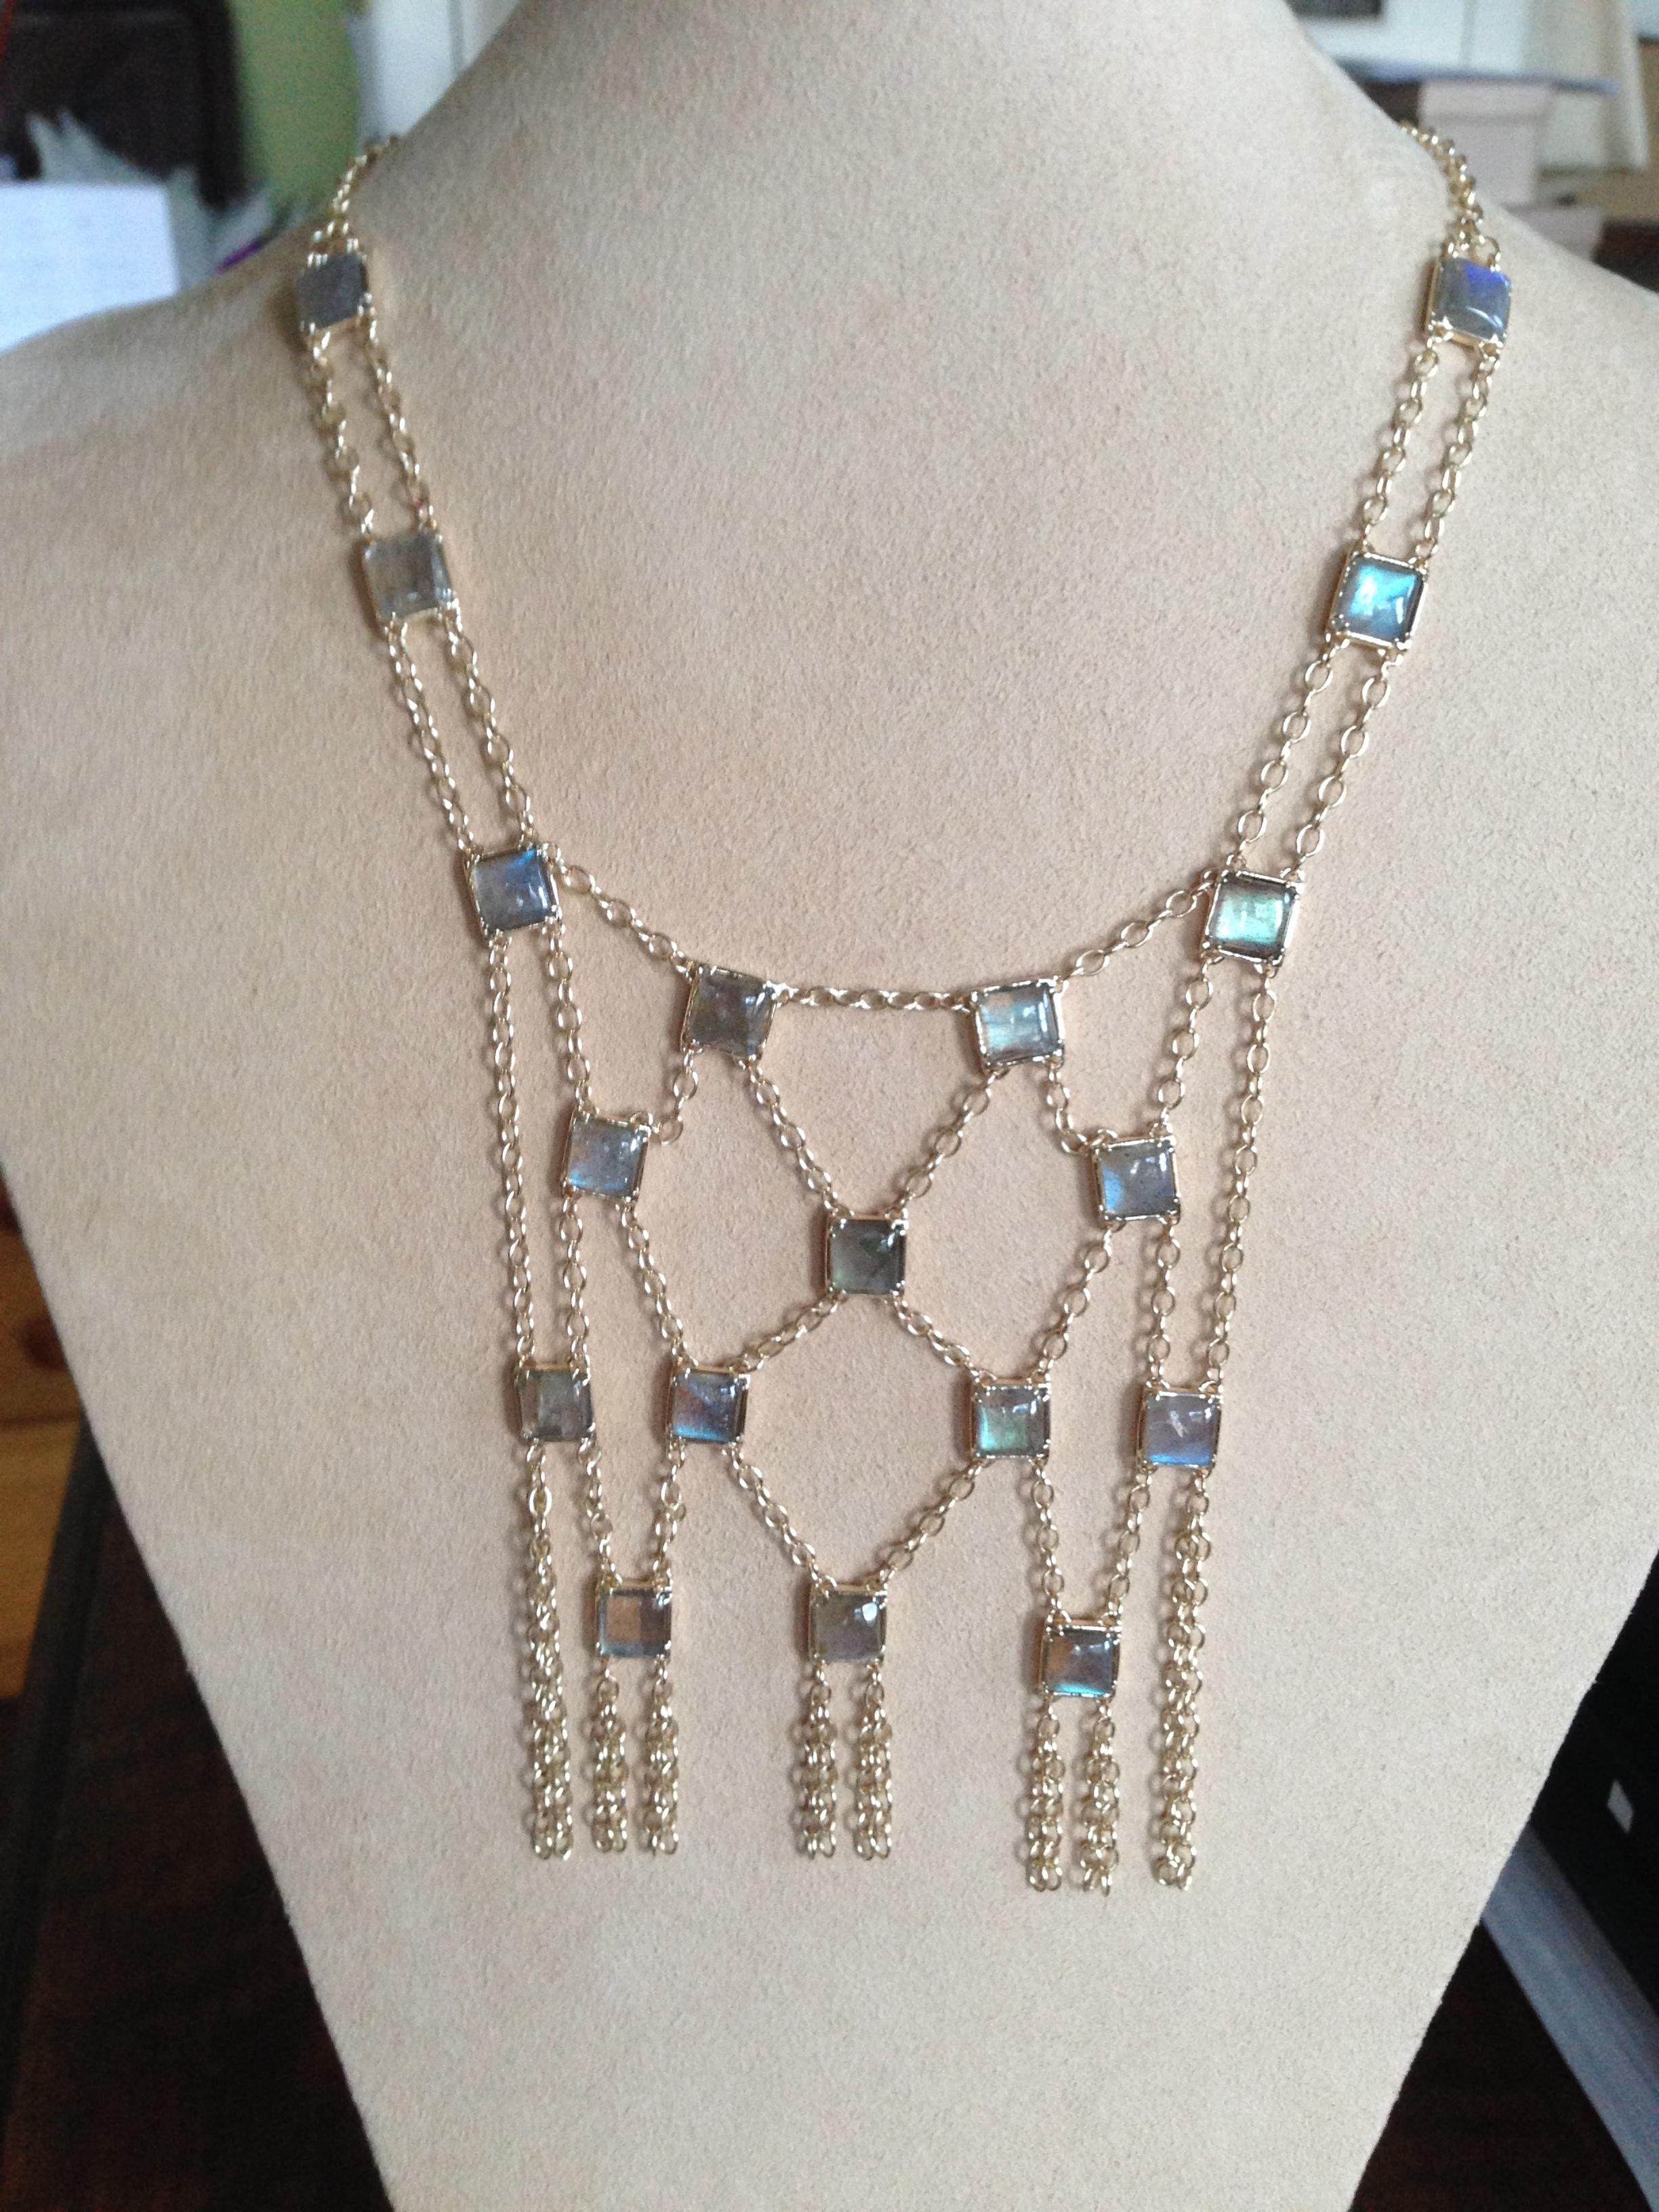 Yellow Gold Mesh Bib Necklace with Labradorite Square Cabochons In New Condition For Sale In Weehawken, NJ